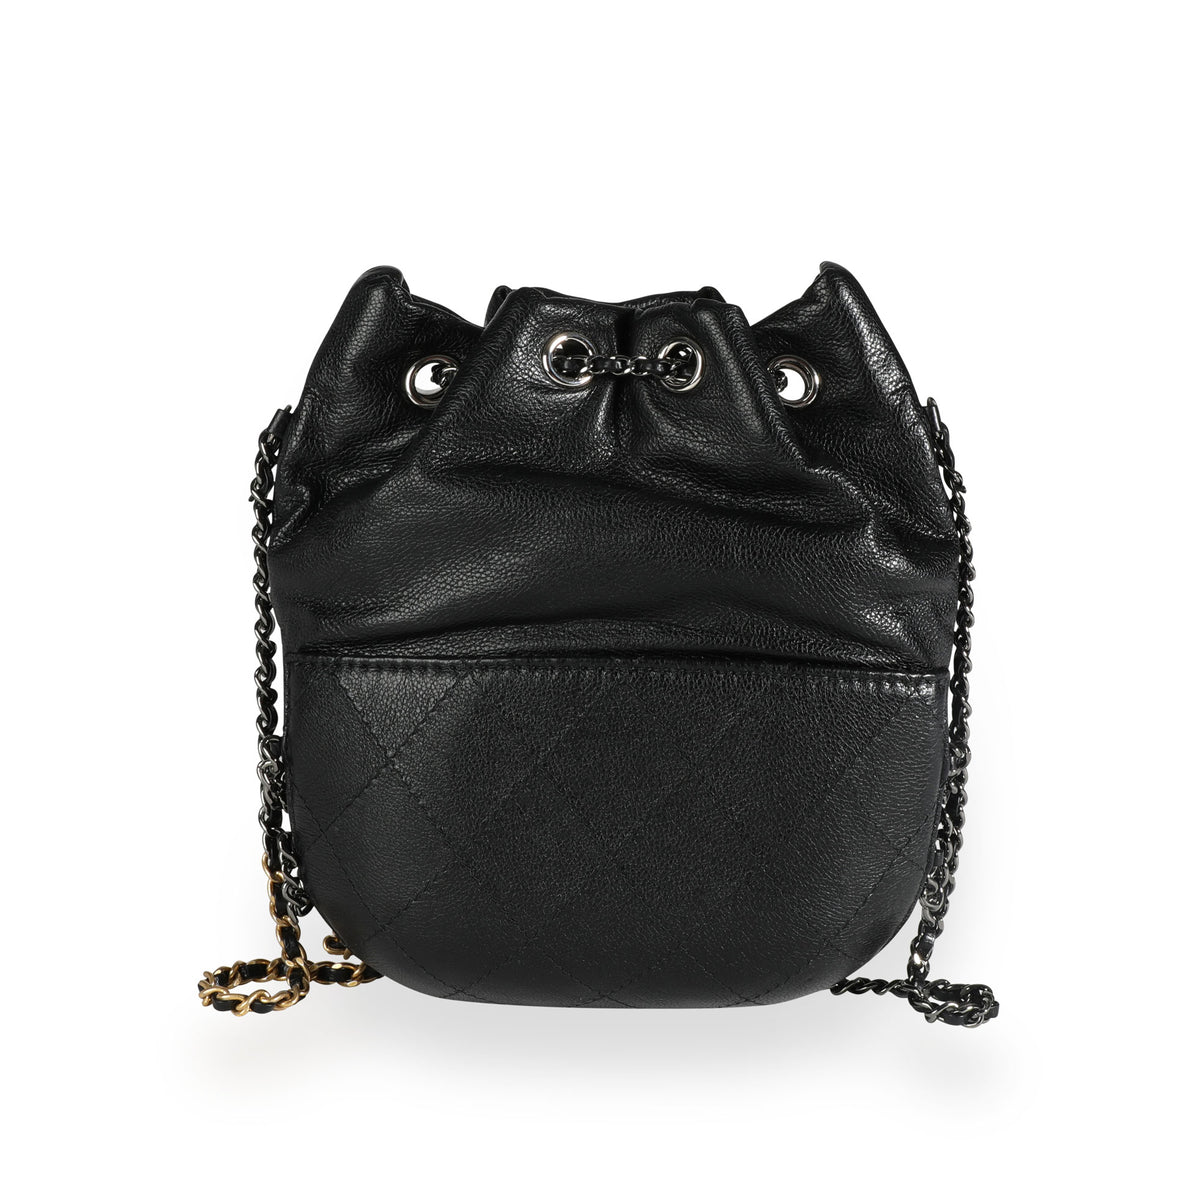 Chanel - Authenticated Gabrielle Bucket Handbag - Leather Black Plain for Women, Very Good Condition